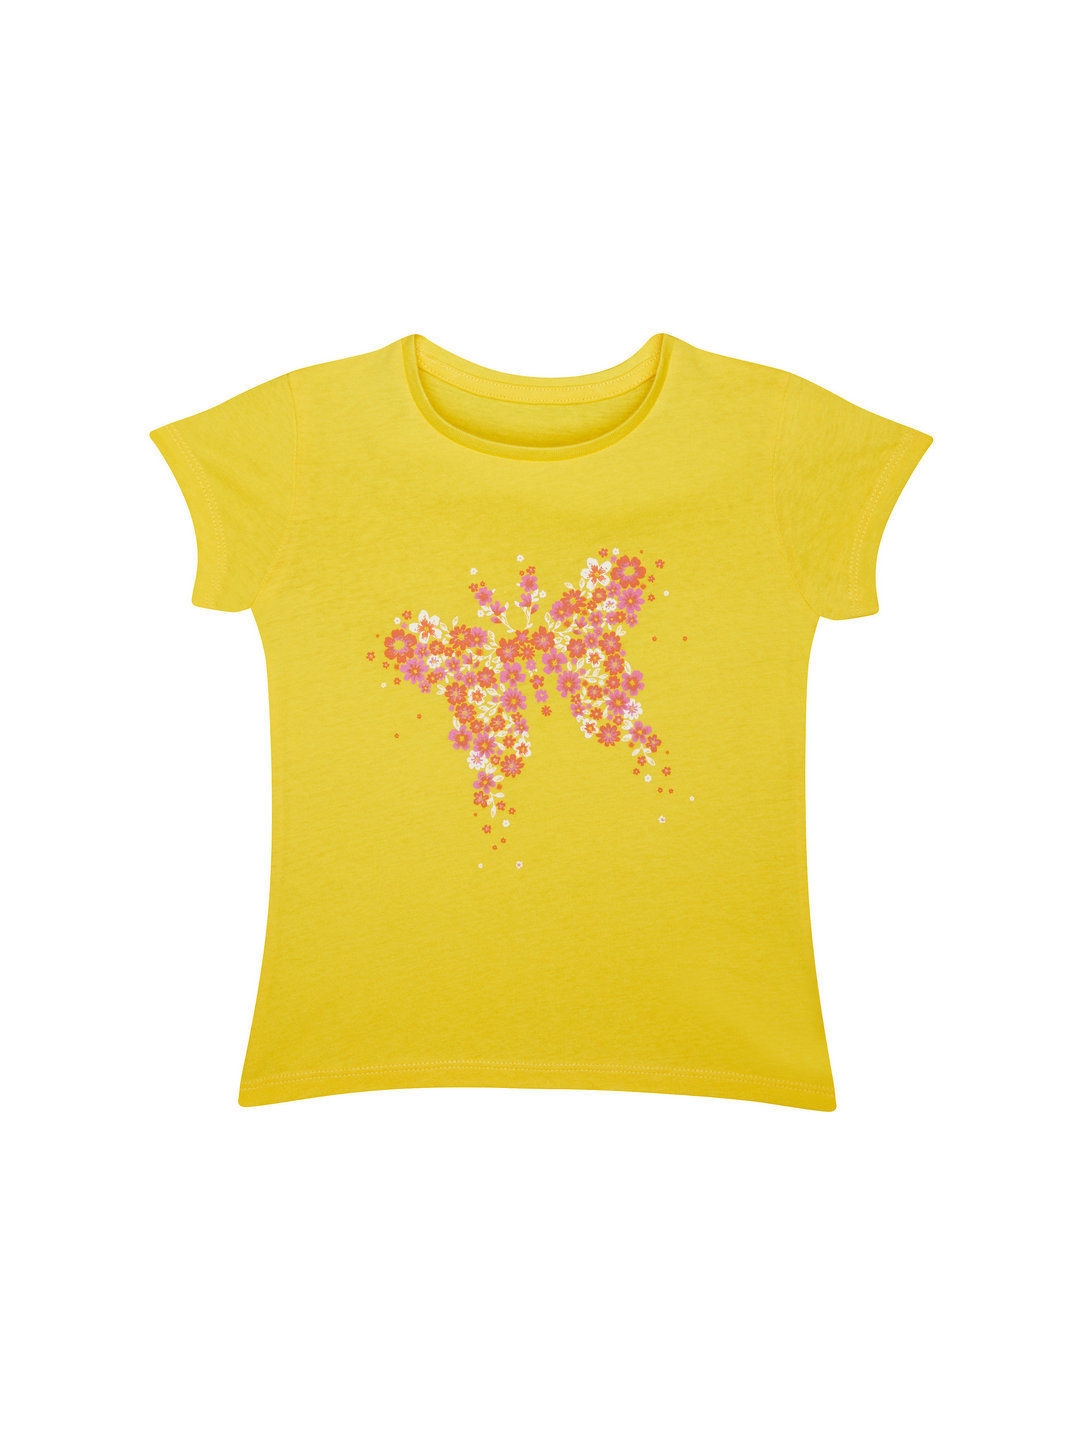 Mothercare | Yellow Printed Top